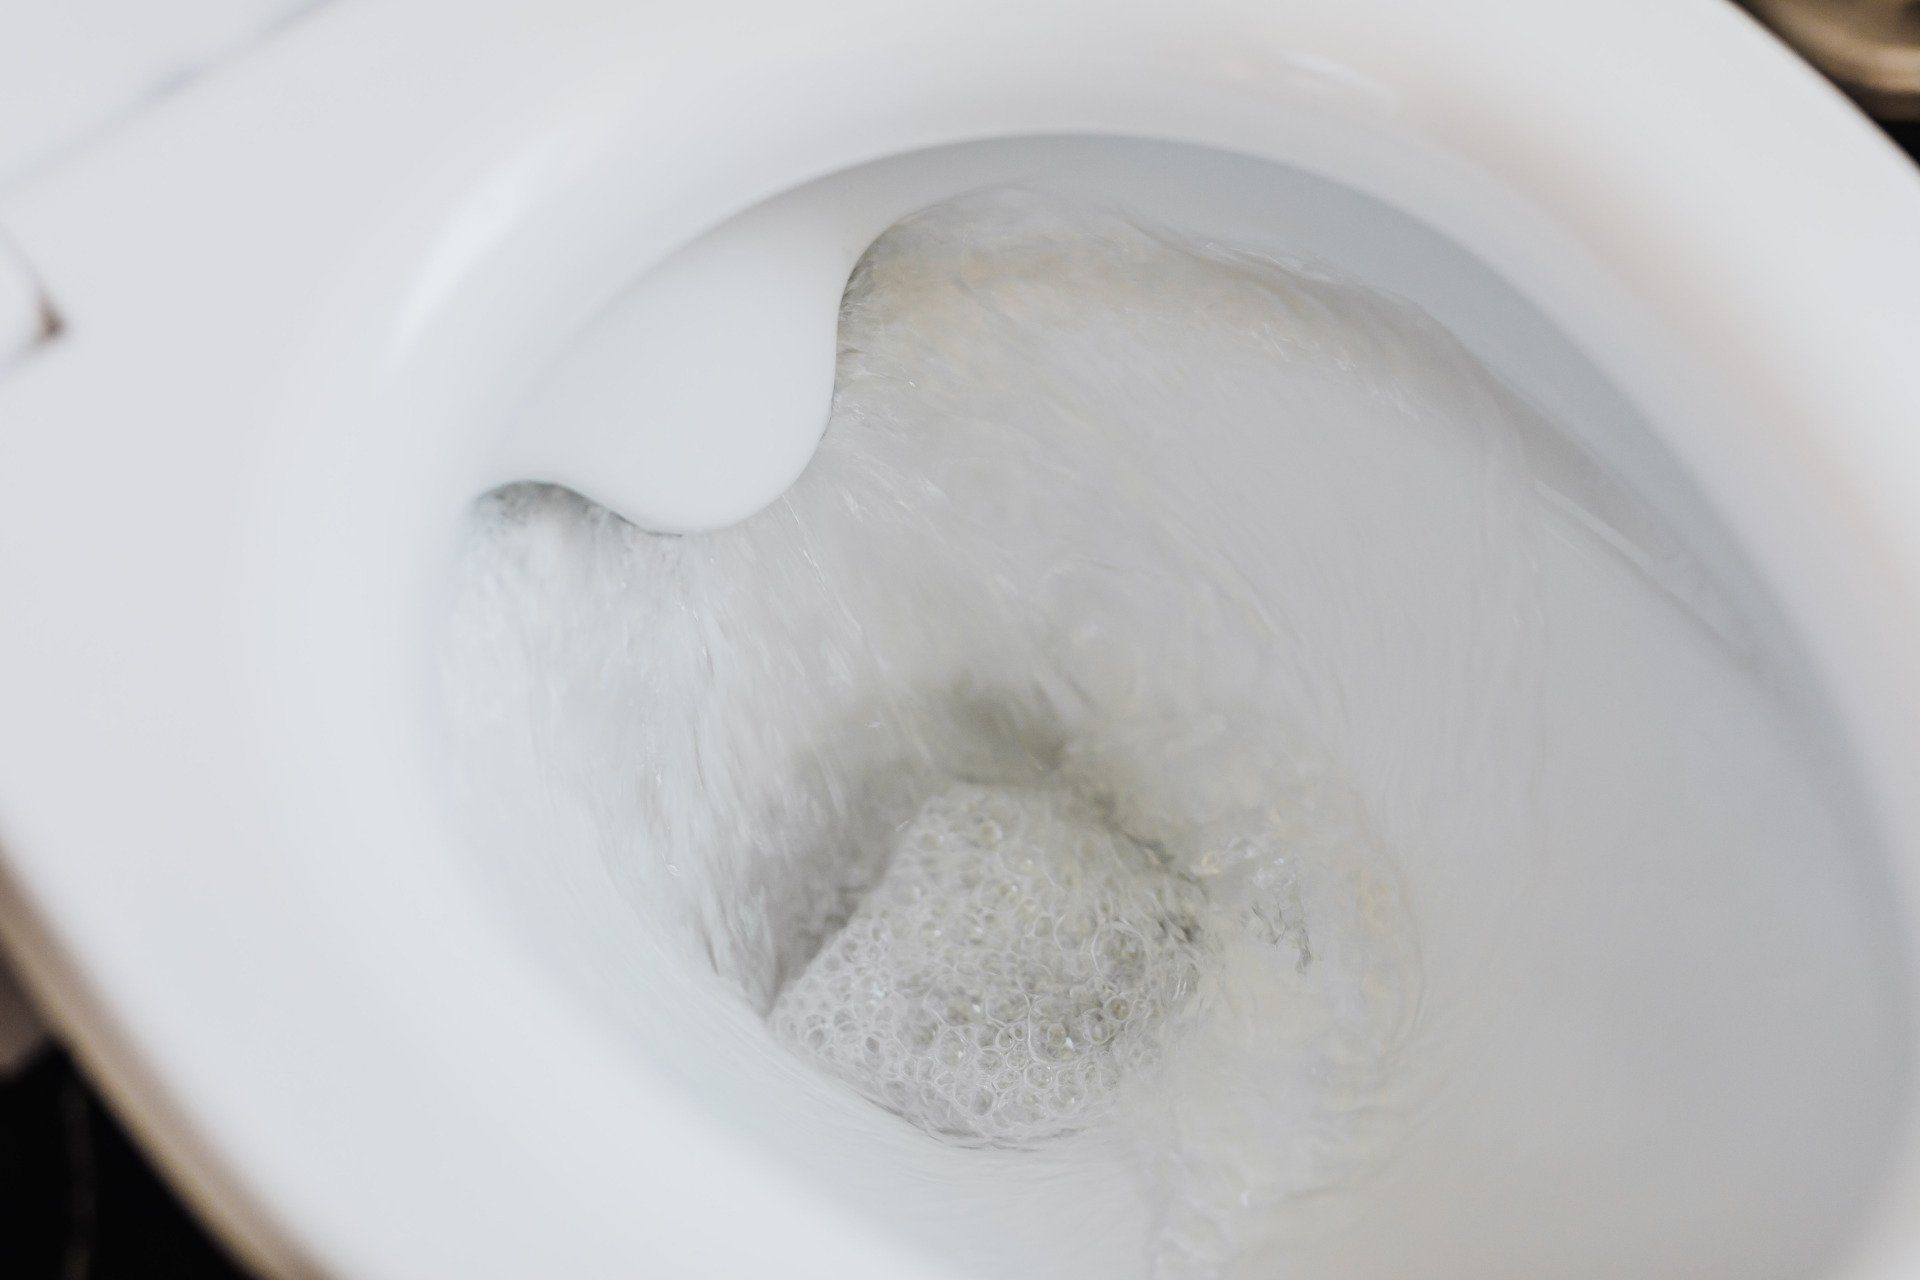 Toilet water flushed